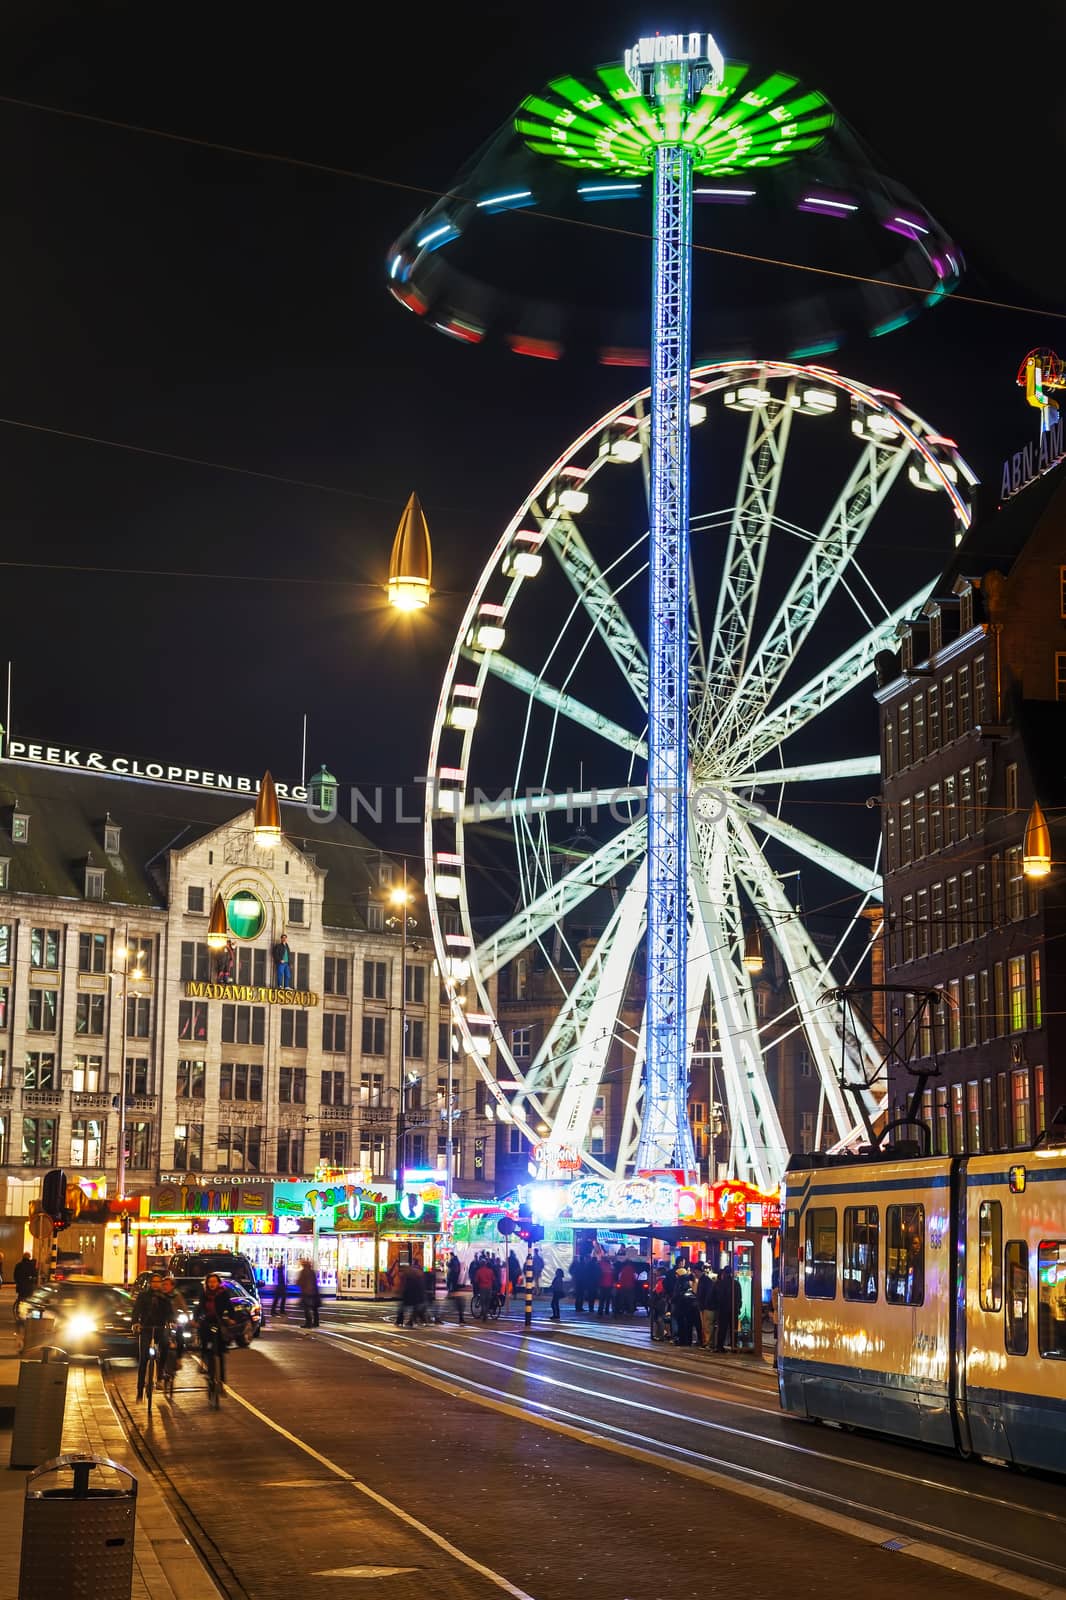 Dam square in Amsterdam by AndreyKr